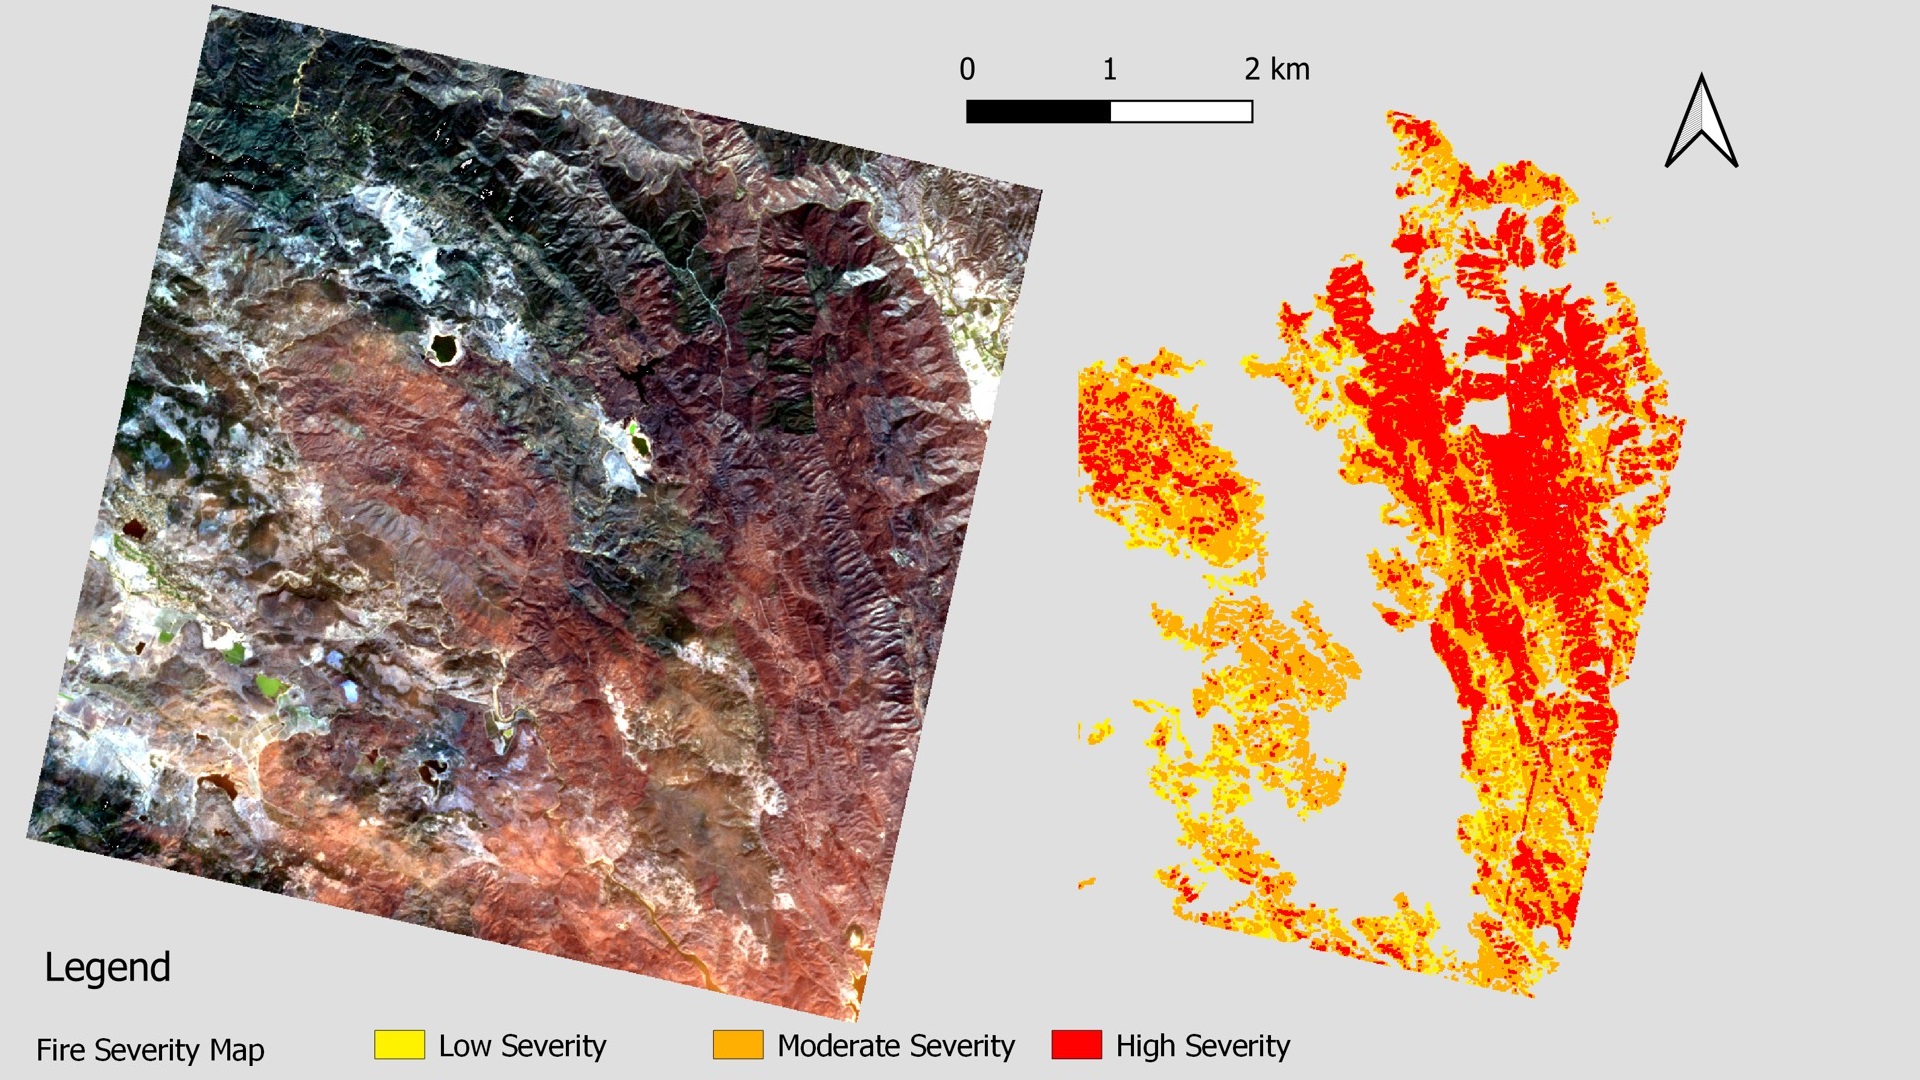 PRISMA for extraction of Fire Severity Maps